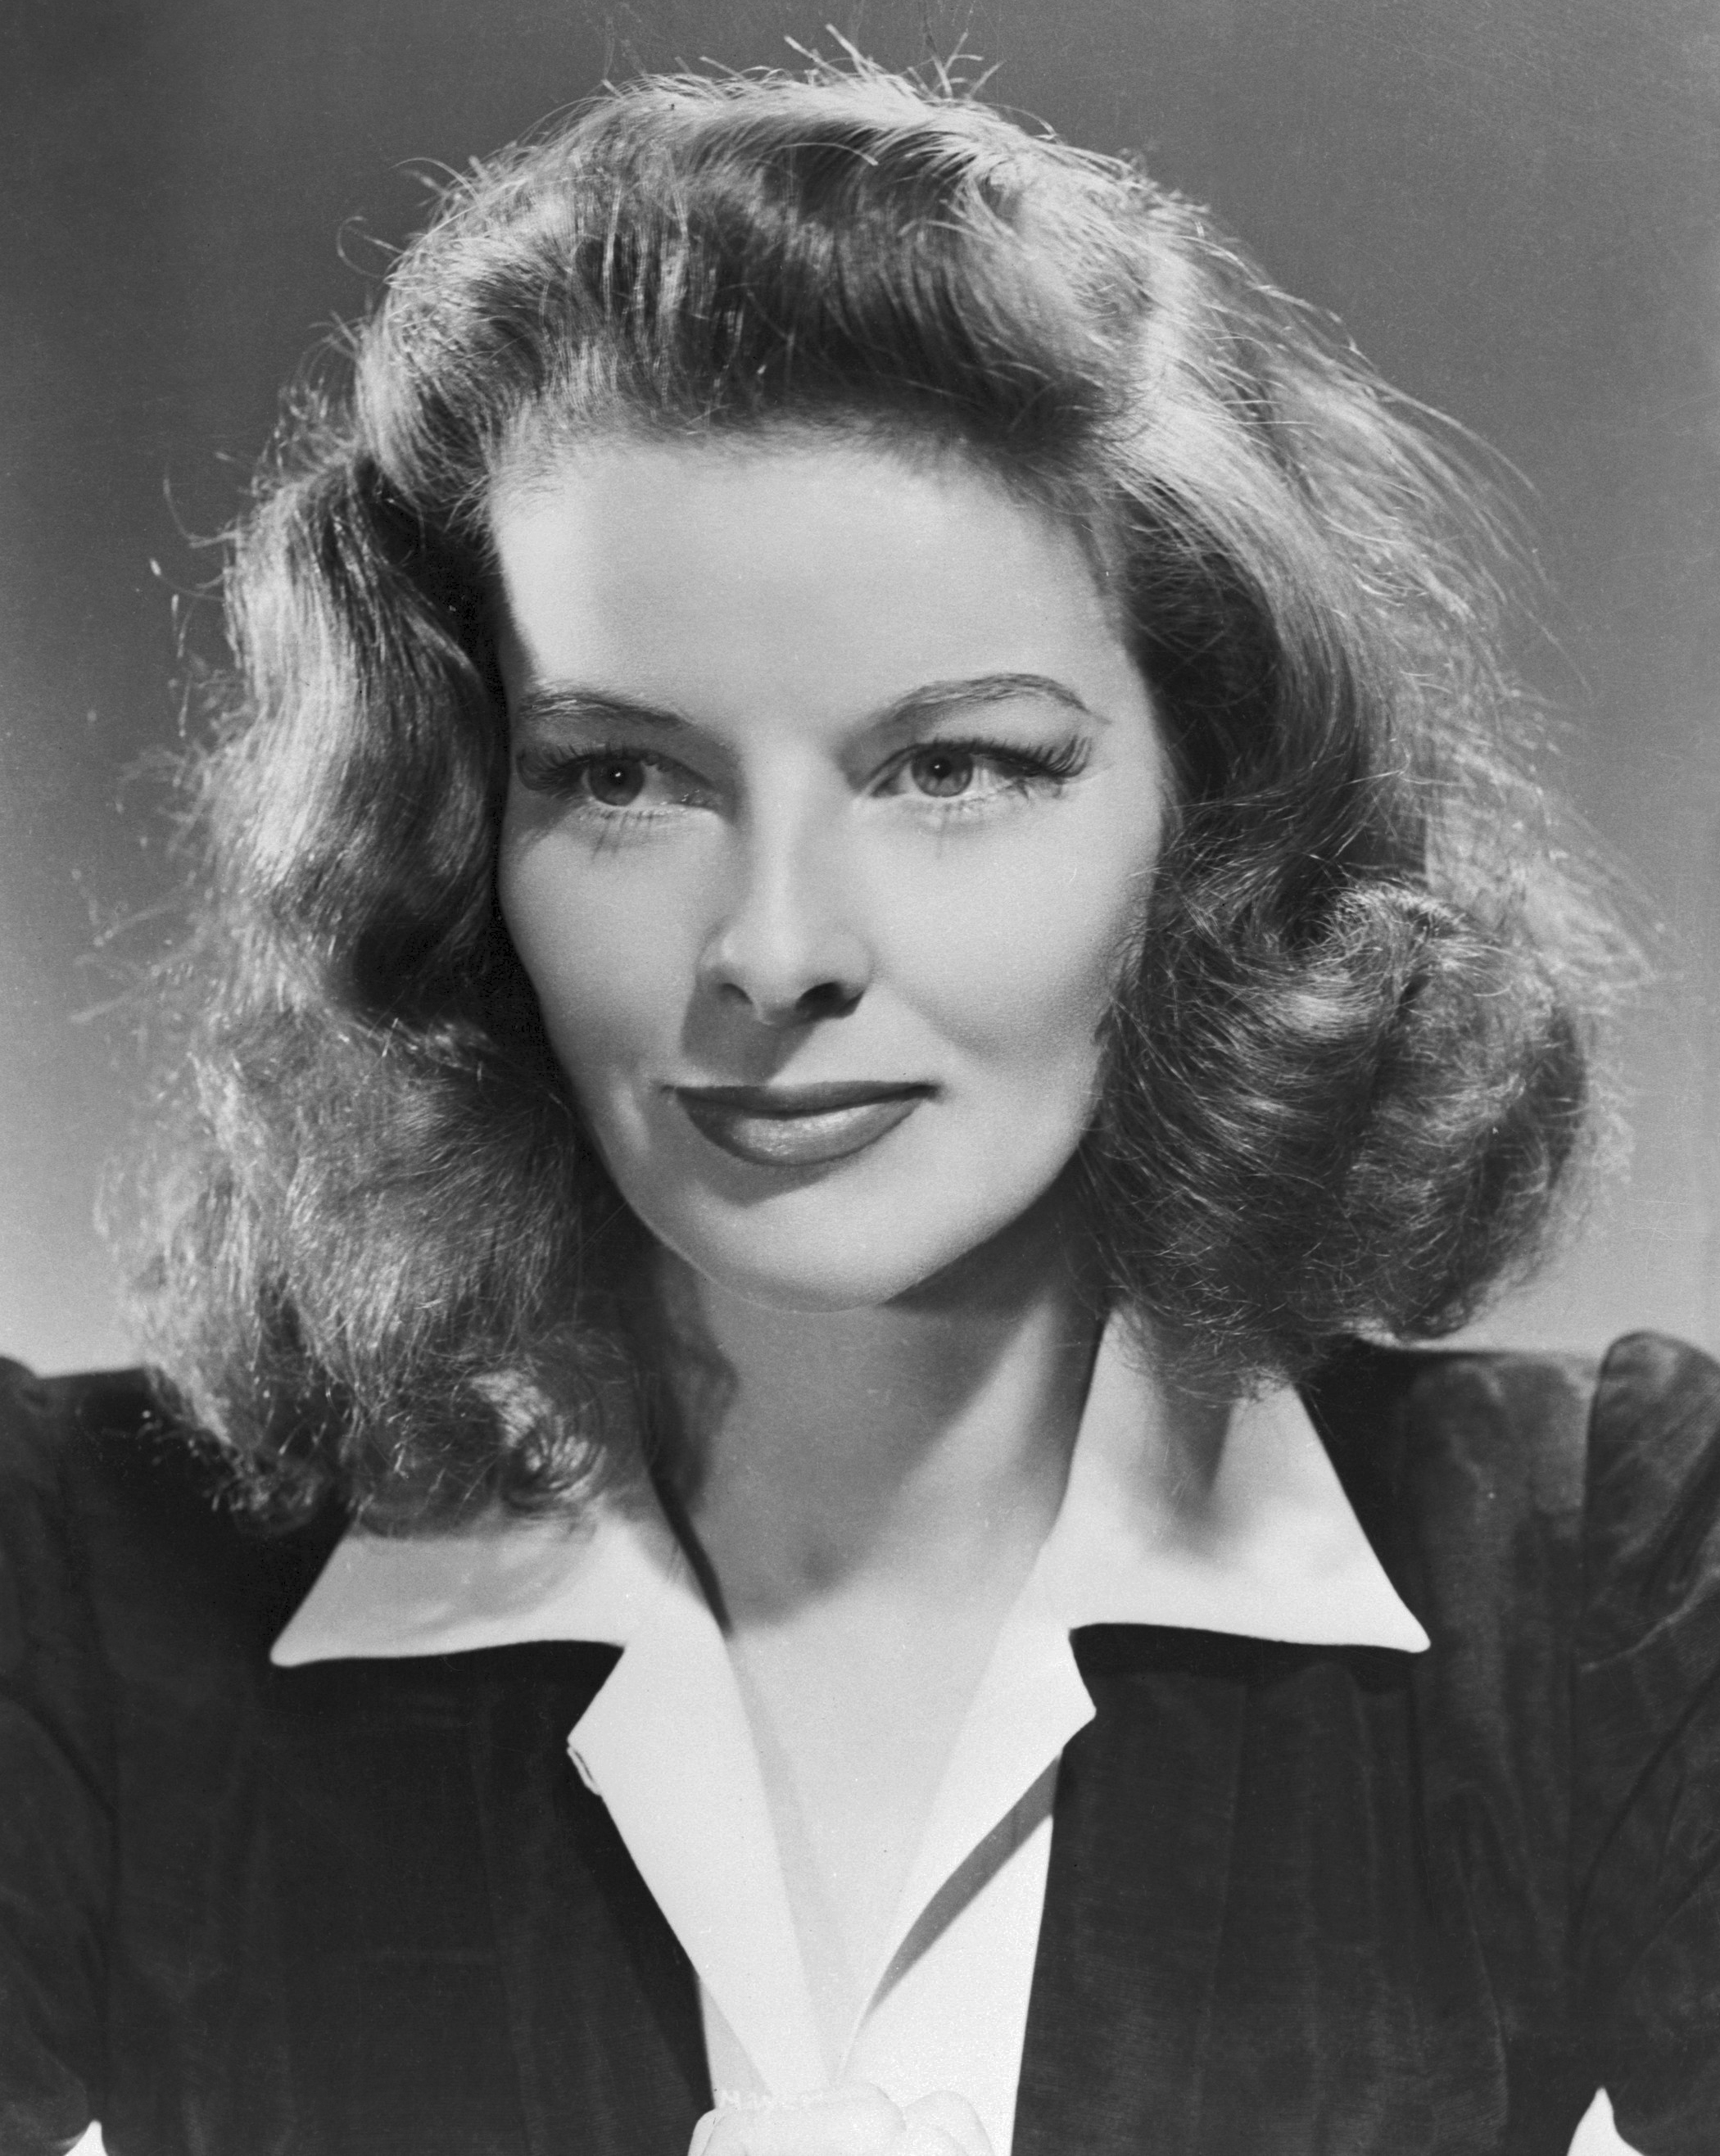 Black and white photo of Katherine Hepburn from the chest up with a small smile, posed as a headshot